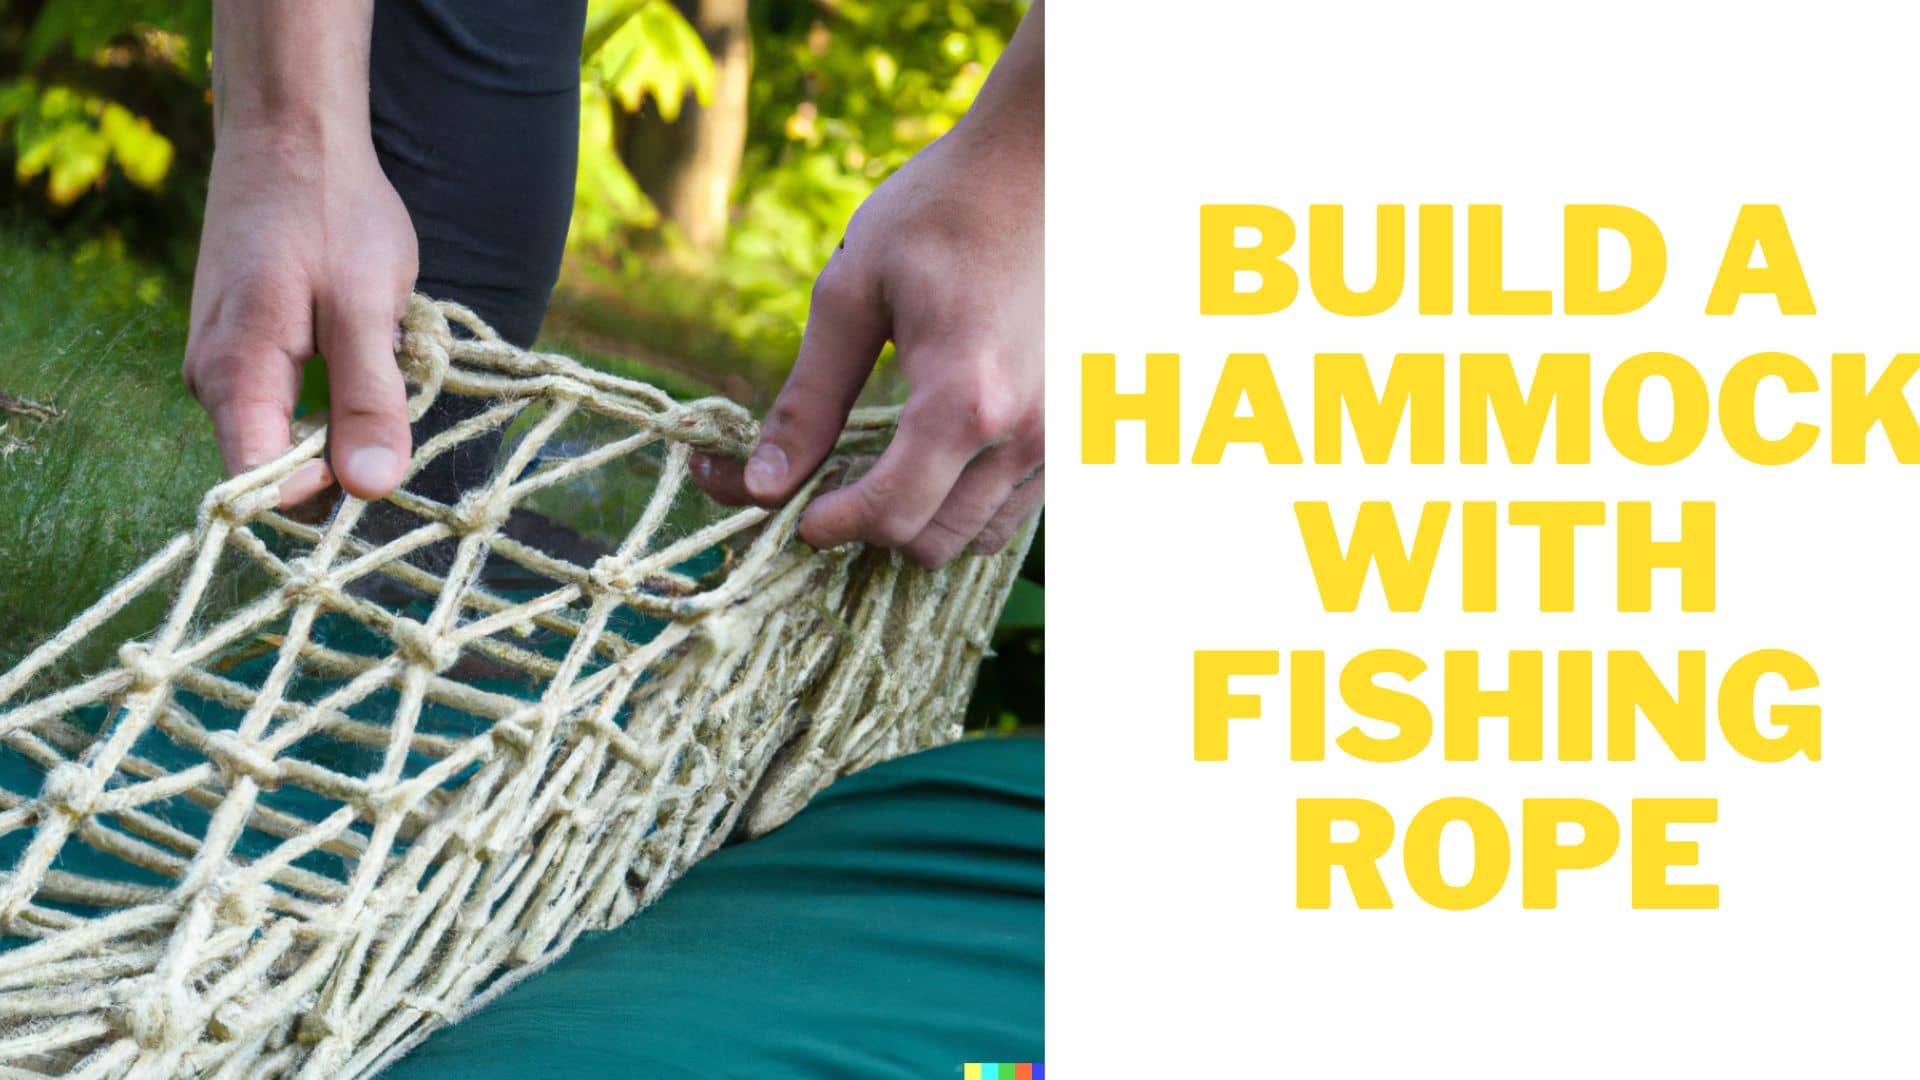 How to Build a Hammock With Fishing Rope